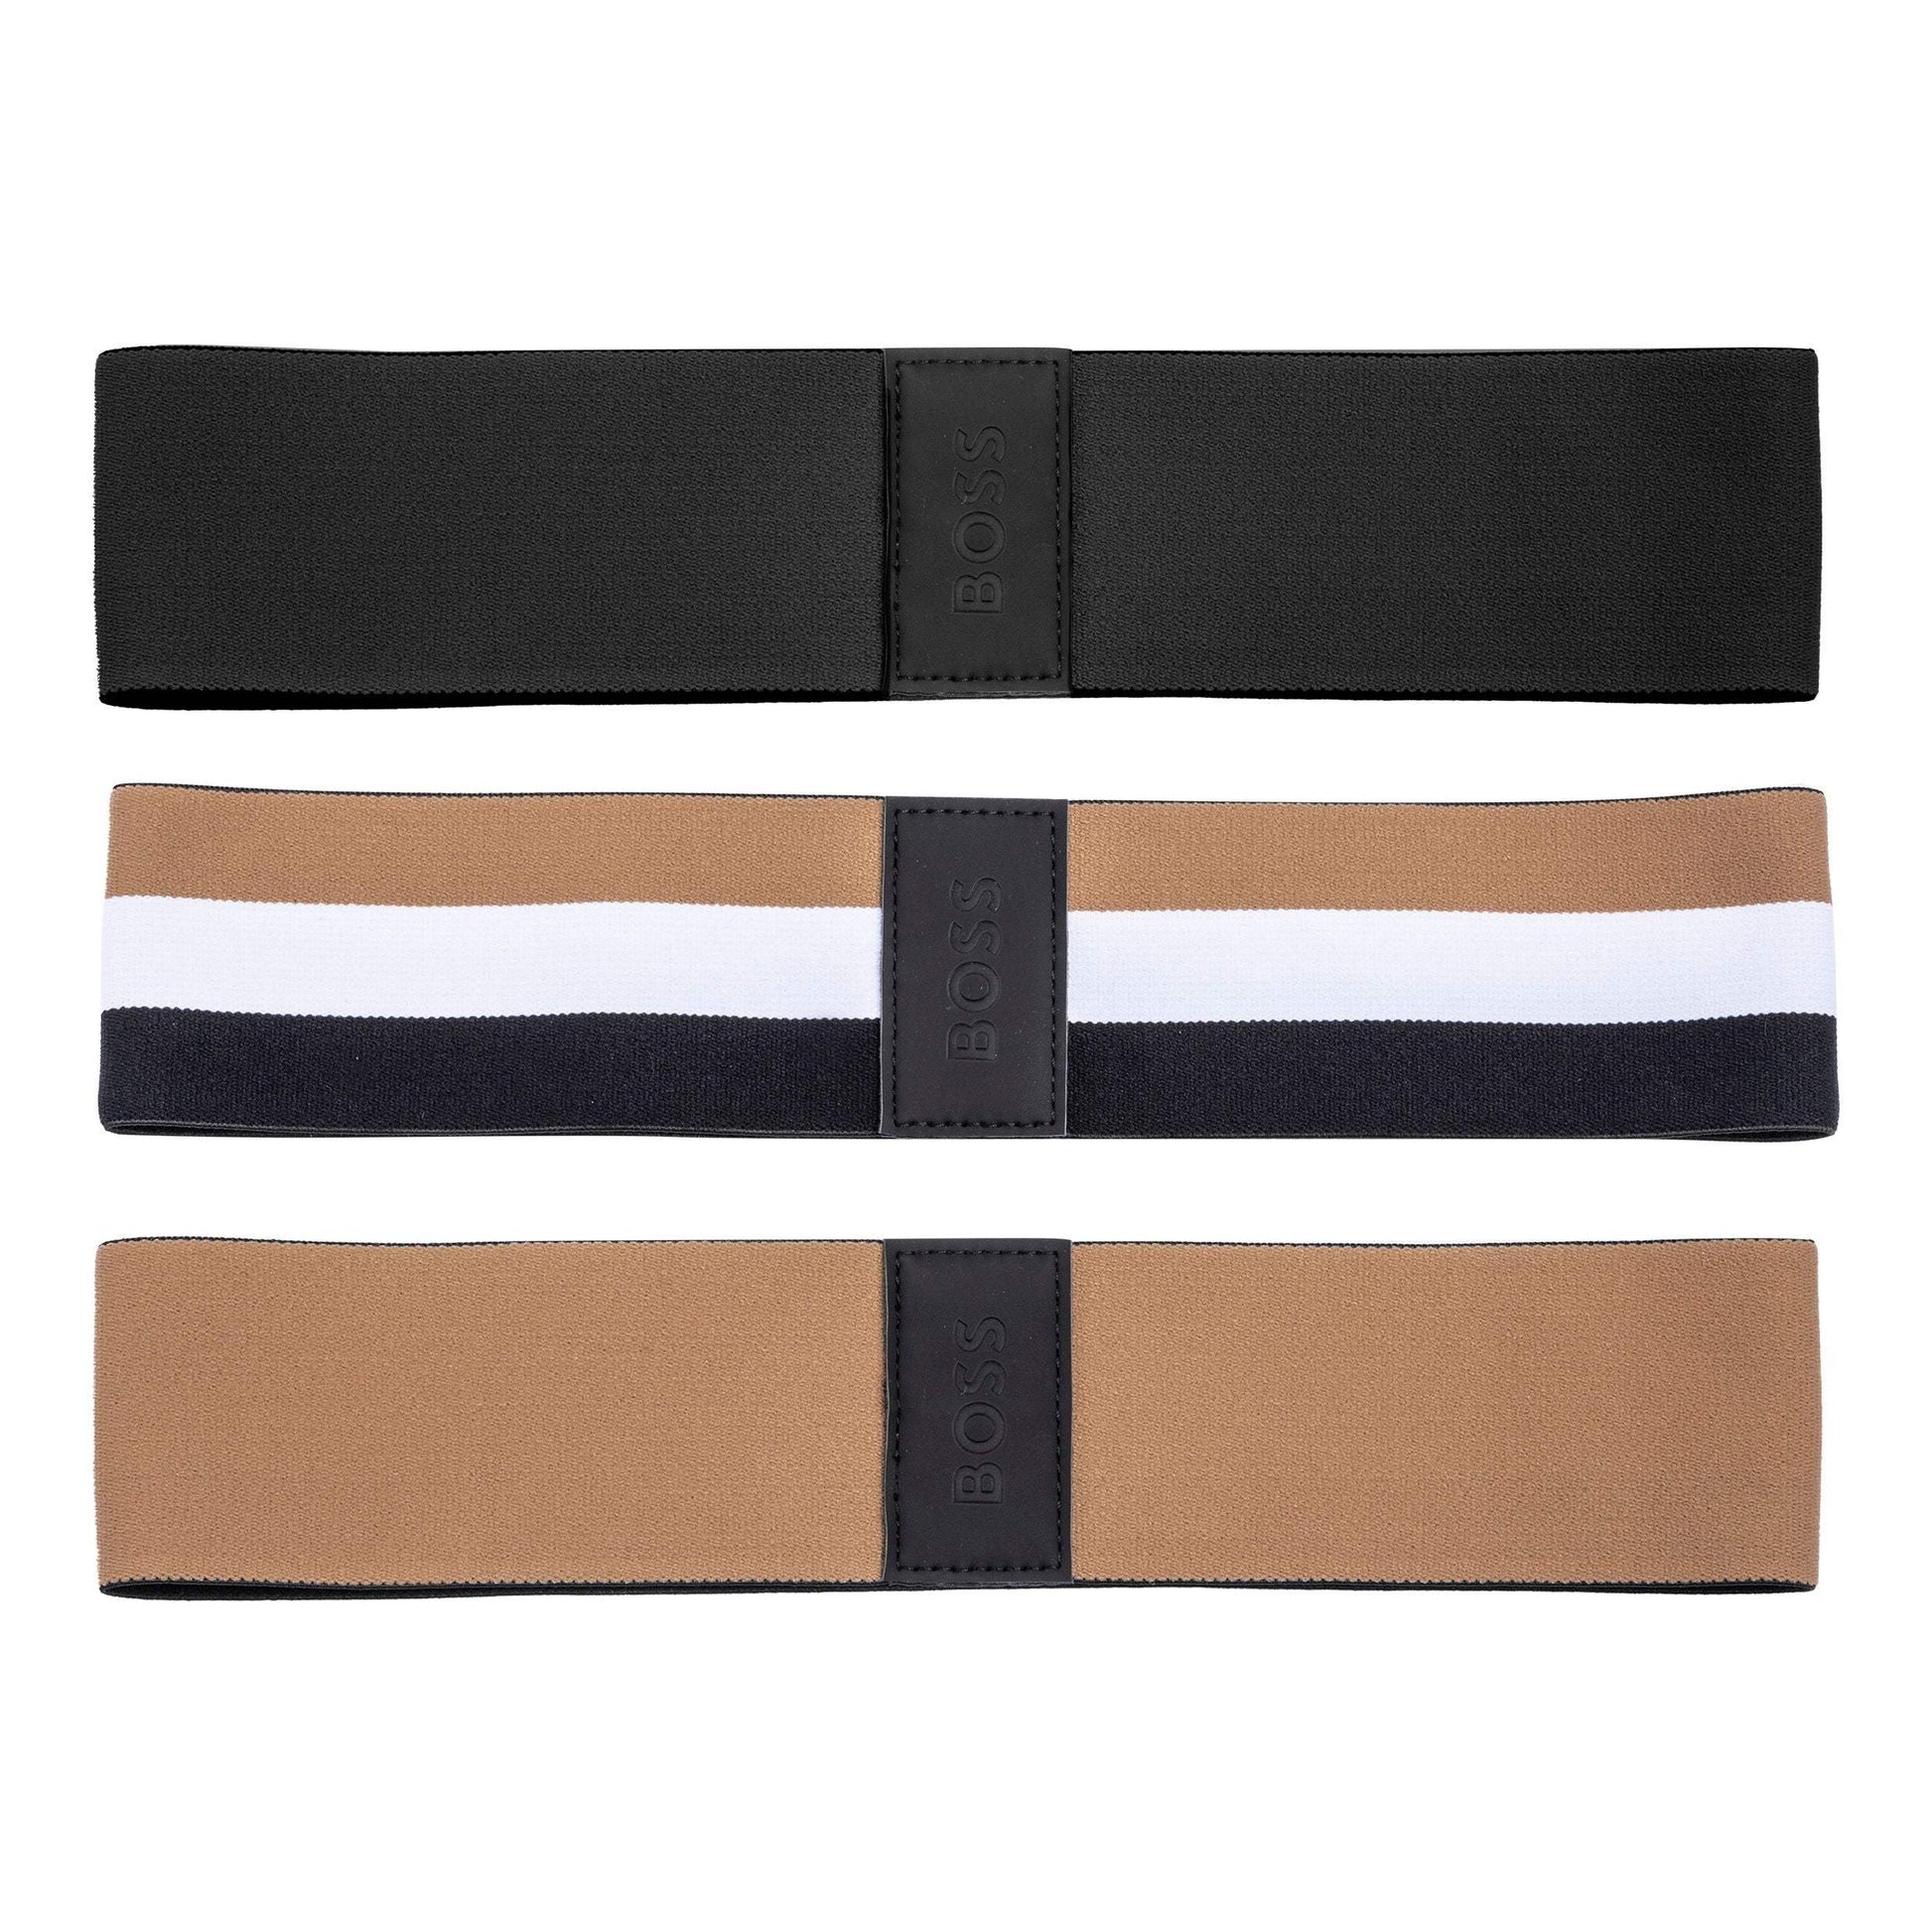 Iconic Resistance Band by Hugo Boss - The Luxury Promotional Gifts Company Limited